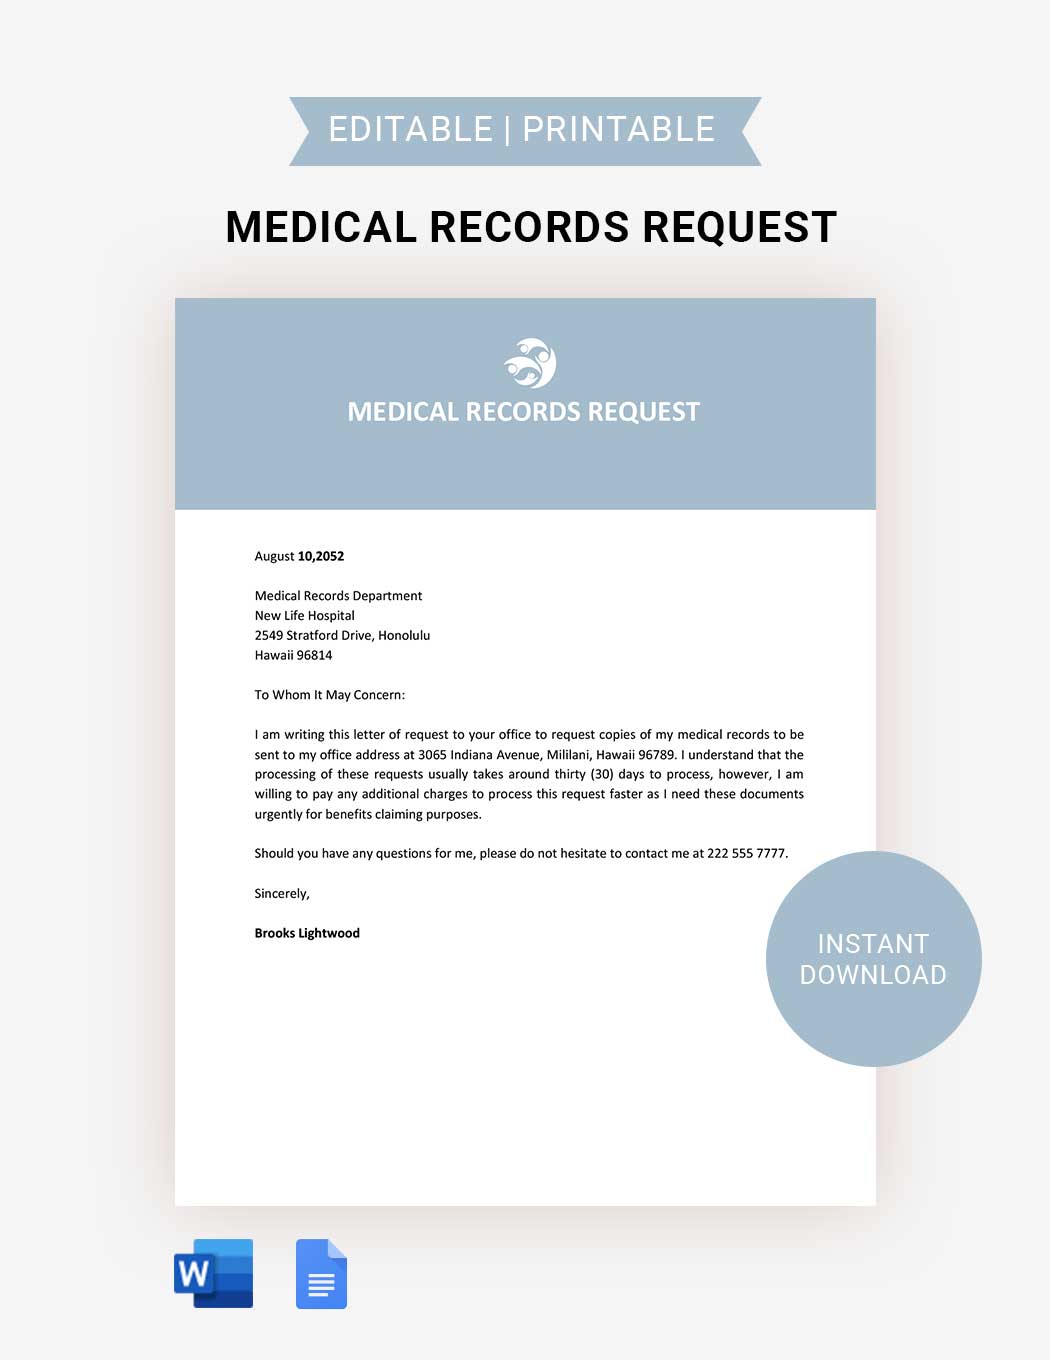 Urgent Medical Records Request Example in Word, Google Docs